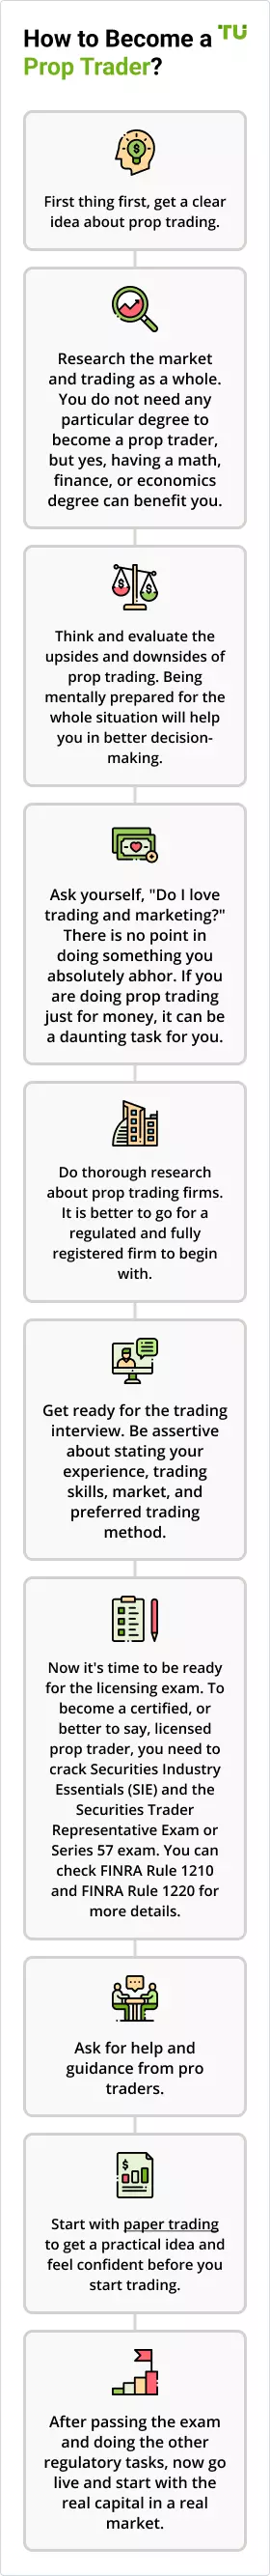 Prop Trading - What Is And How To Become A Prop Trader - Living From Trading